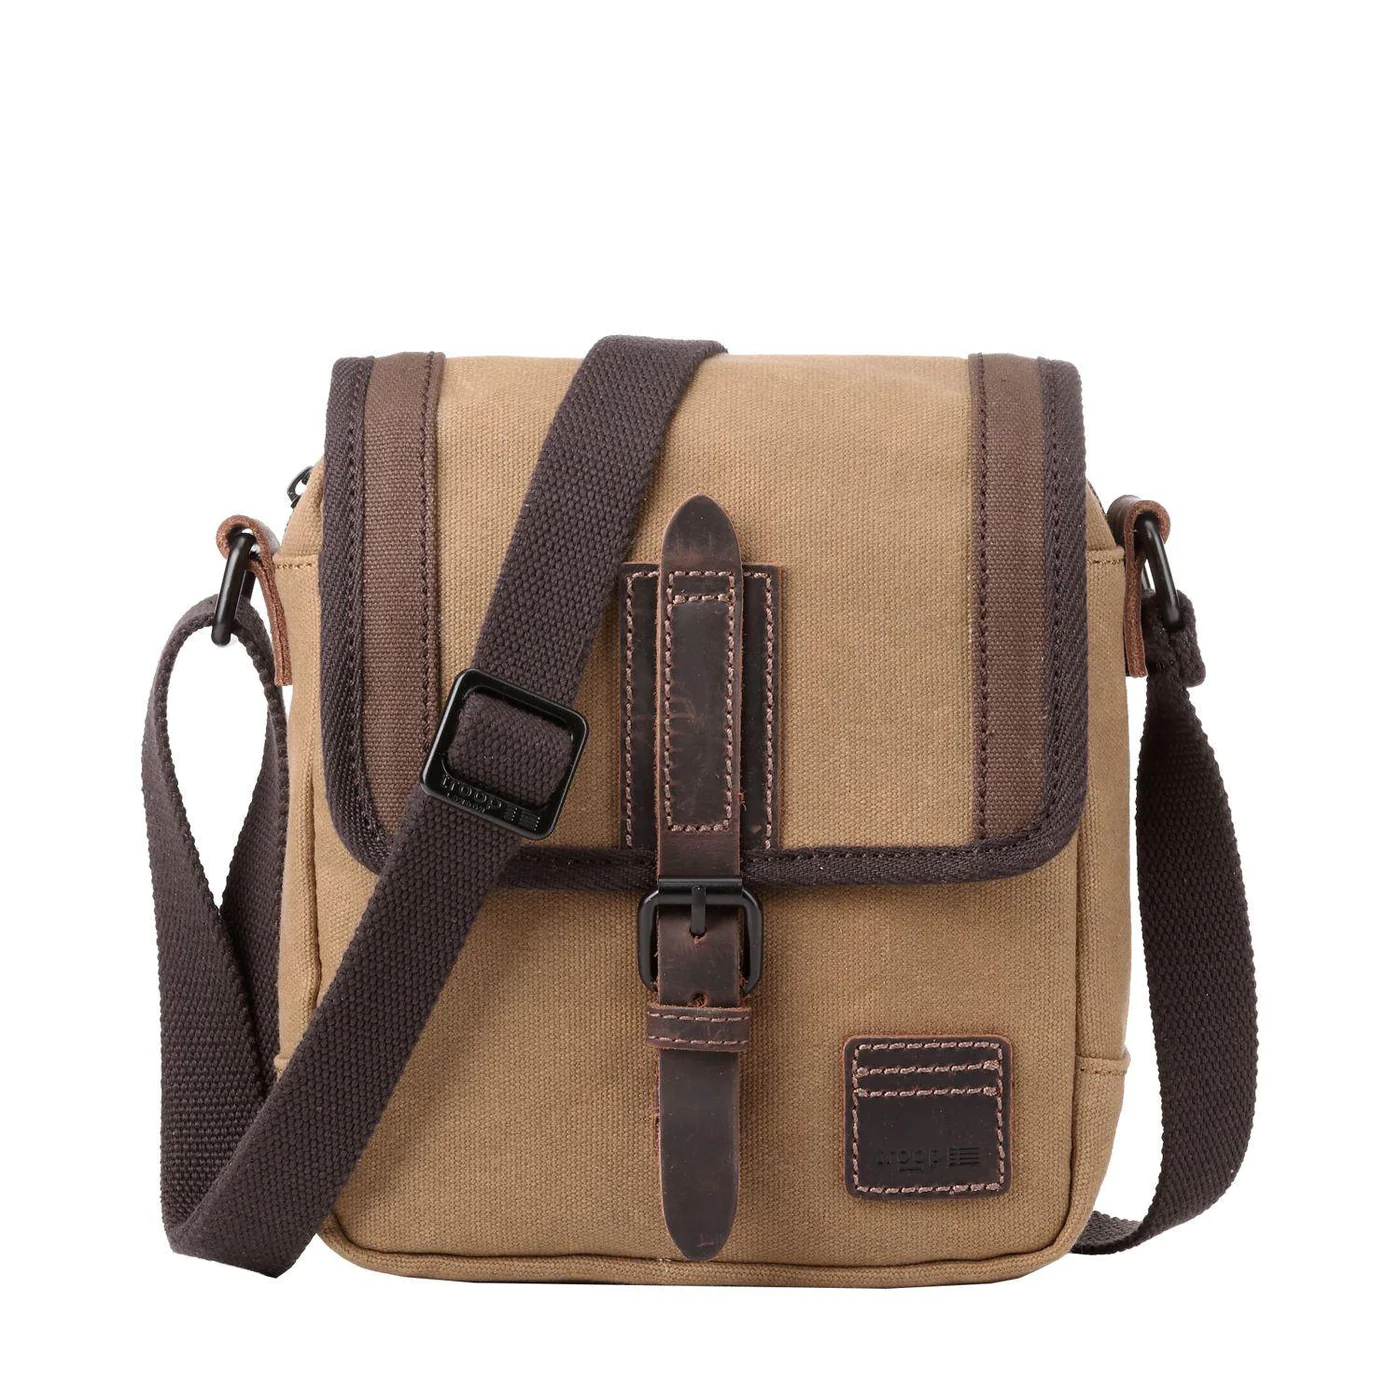 Troop Heritage Waxed Cross Body Bag - Thornton and Collins